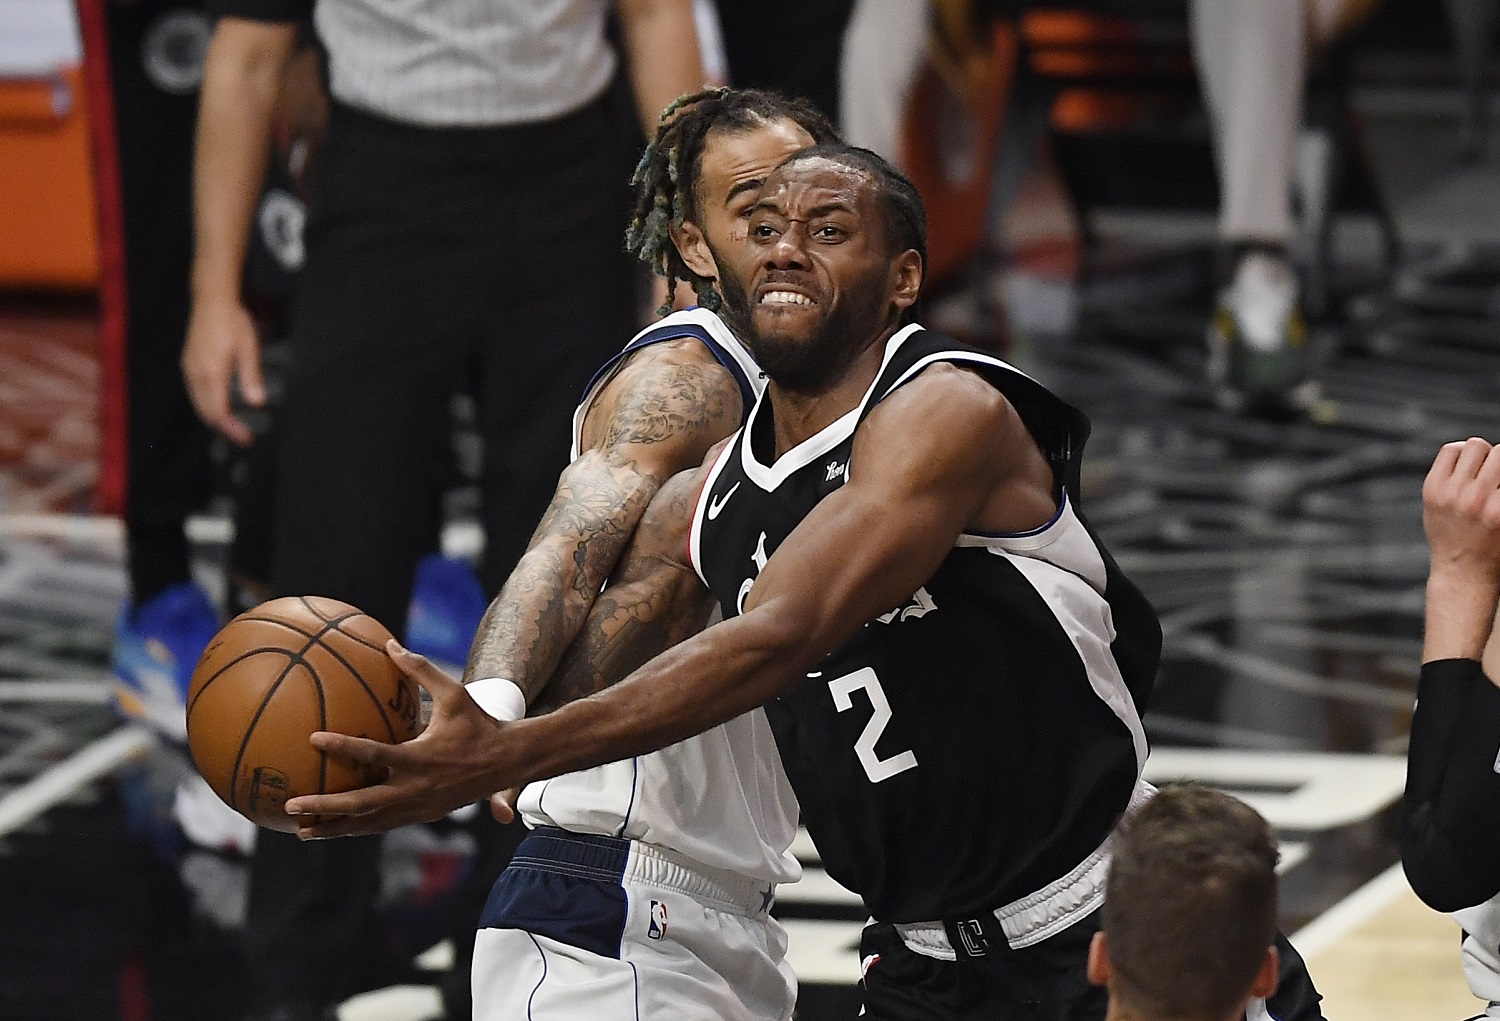 Kawhi Leonard of the Los Angeles Clippers is fouled by Willie Cauley-Stein of the Dallas Mavericks during the first half of Game 5 of the Western Conference first round series.